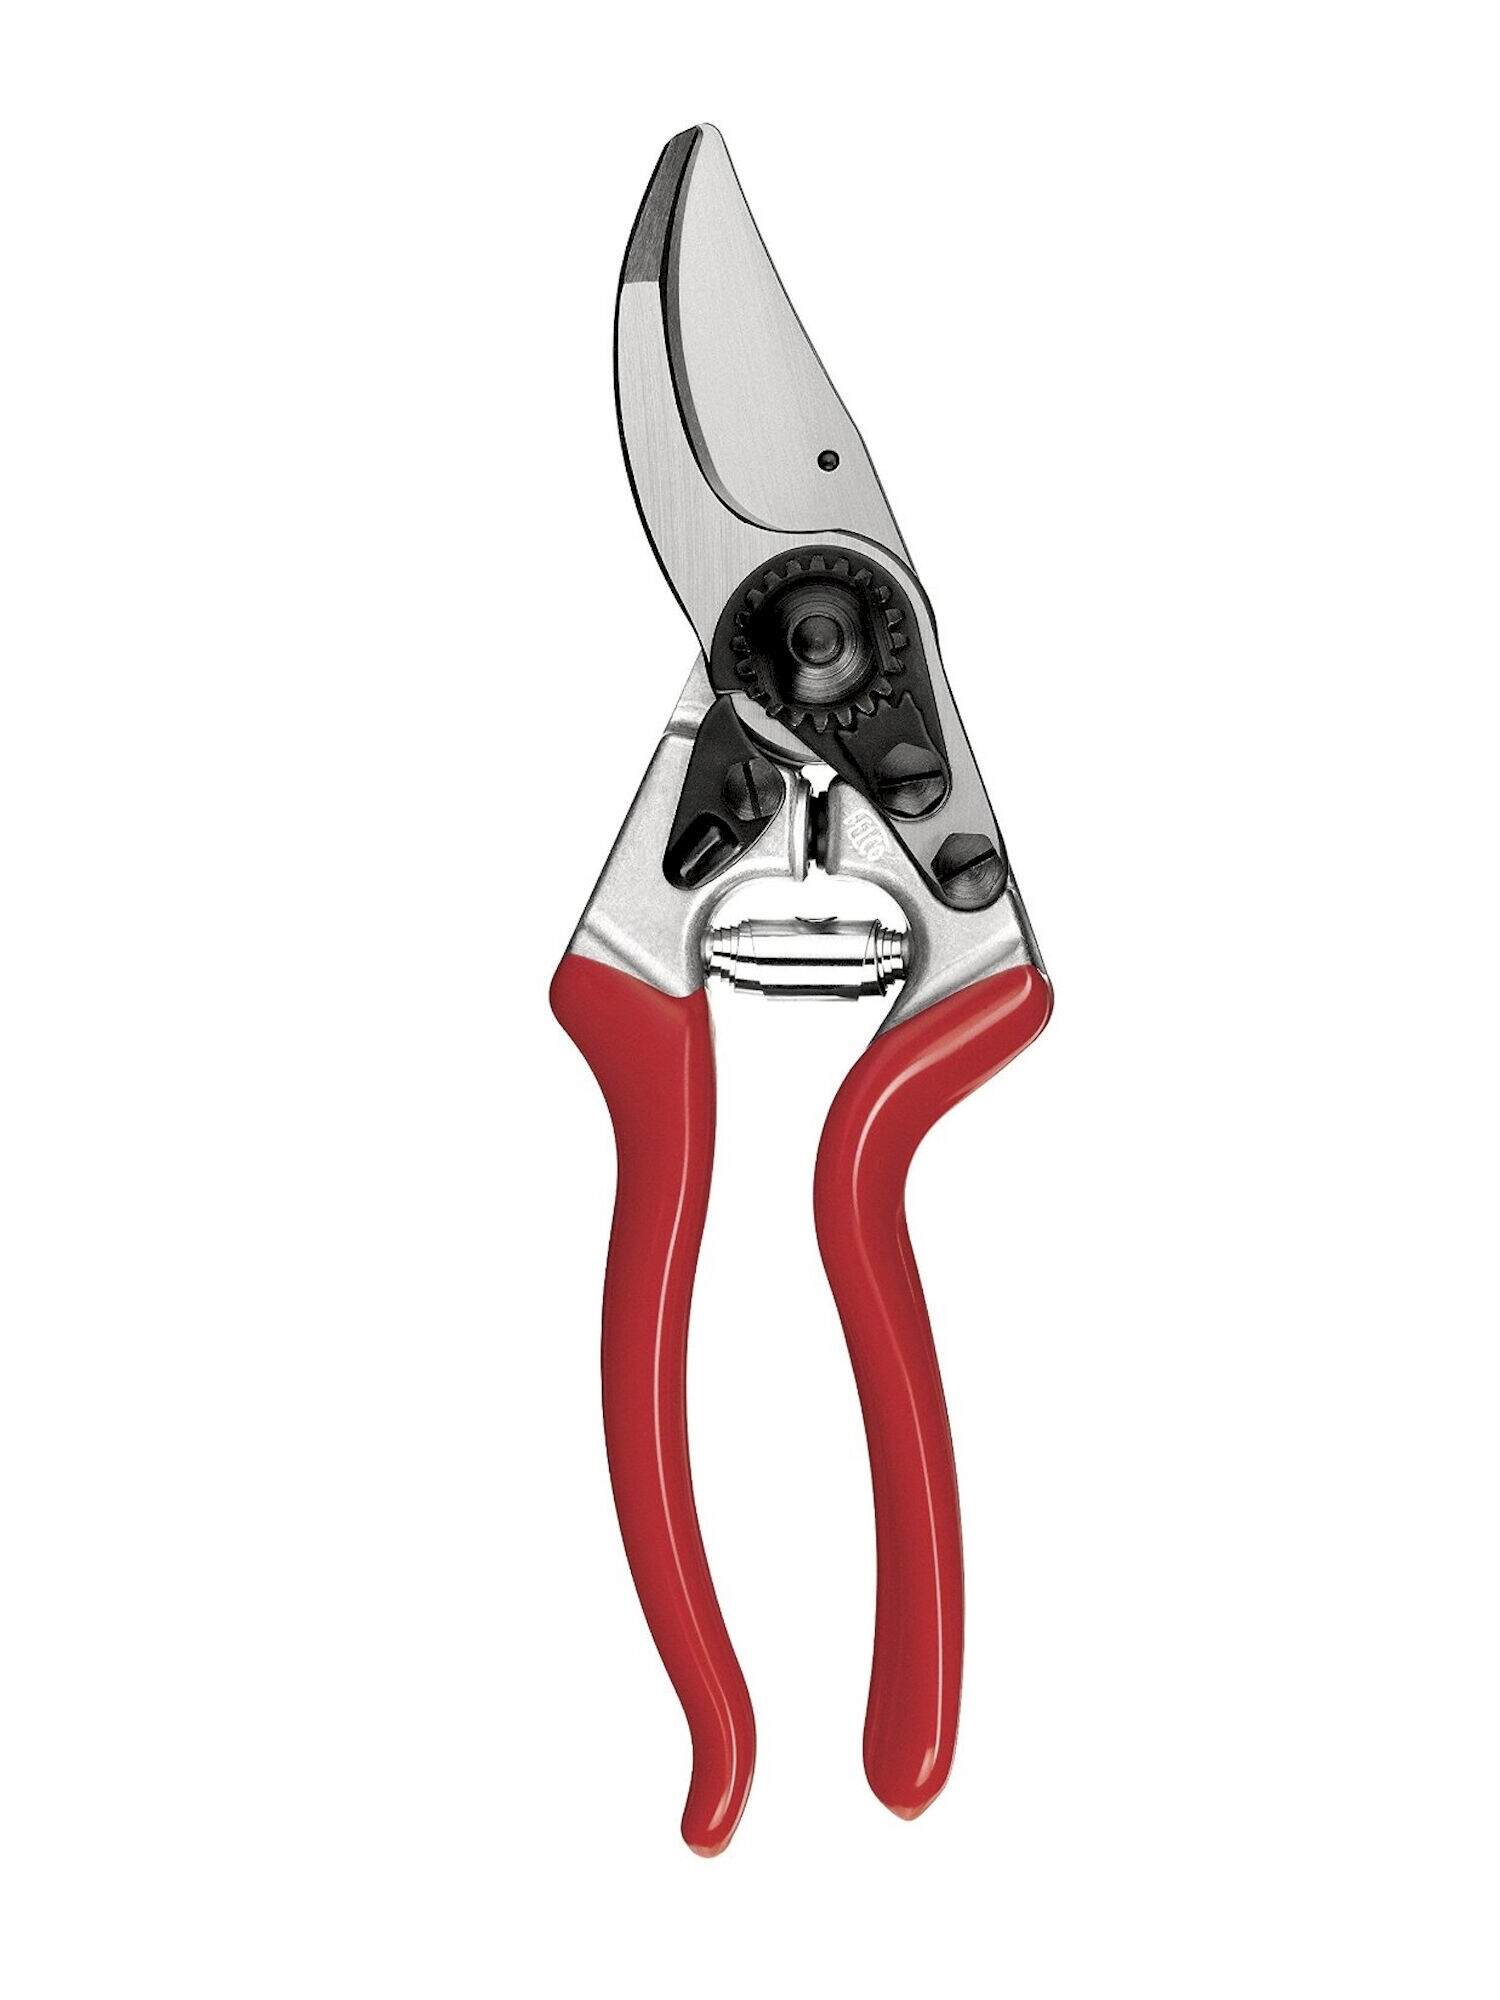 Details about   Hisho Left-handed pruning shears 200mm Kindome 30019 